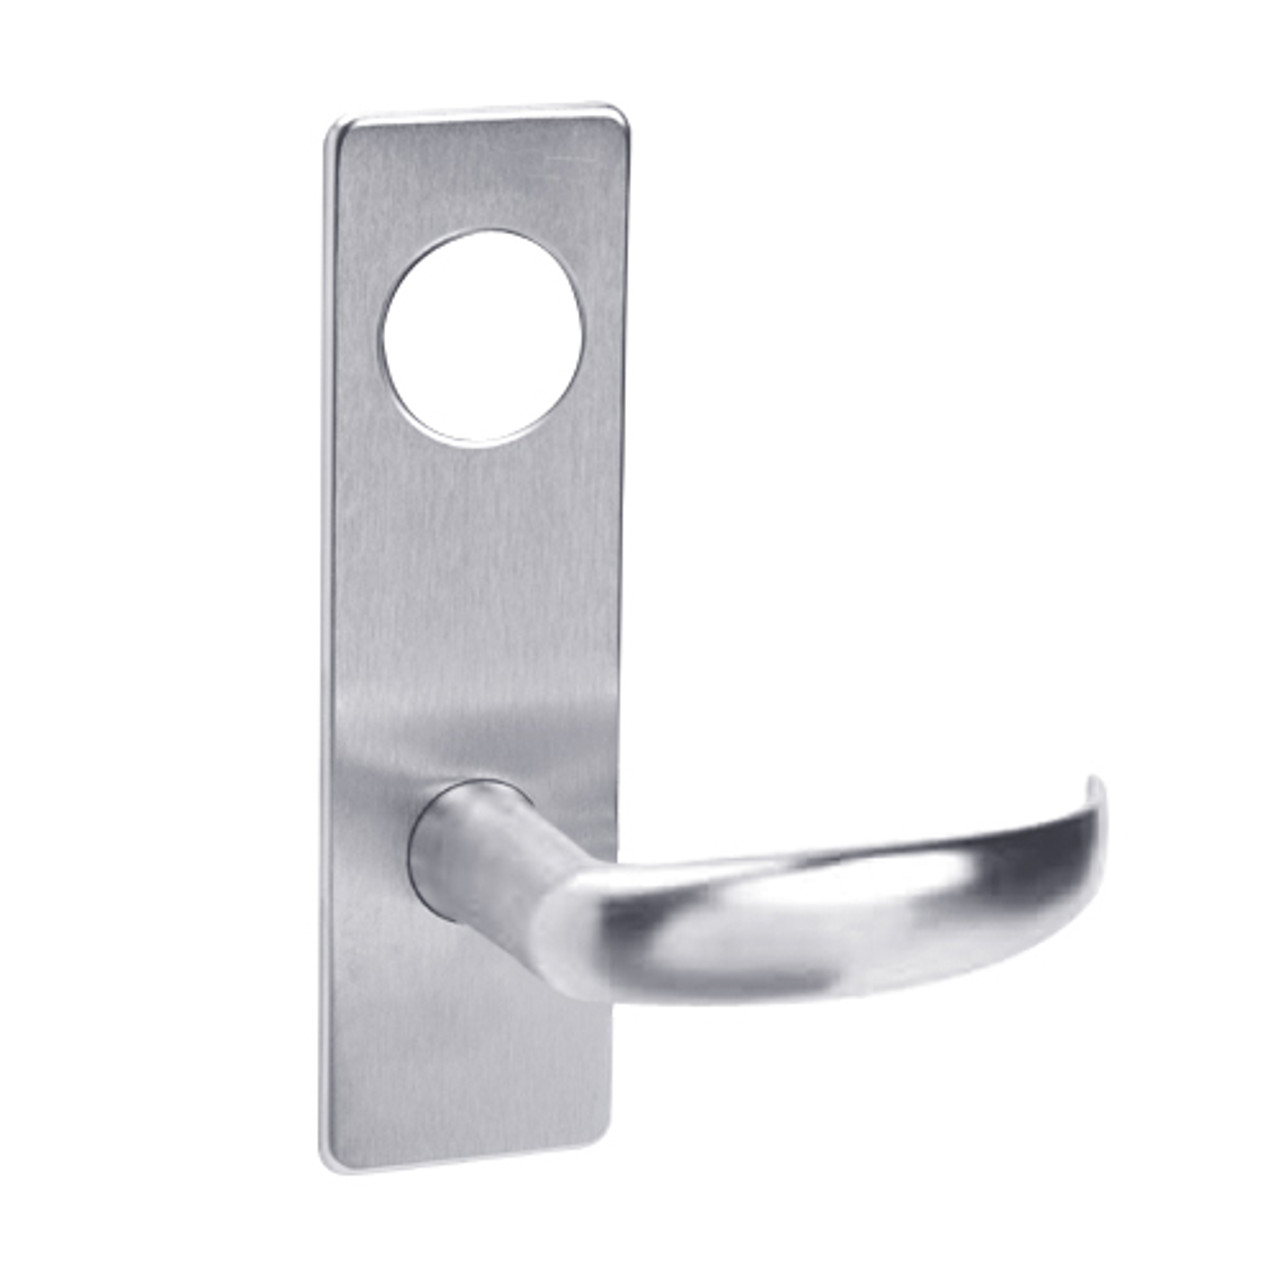 ML2051-PSM-625-M31 Corbin Russwin ML2000 Series Mortise Office Trim Pack with Princeton Lever in Bright Chrome